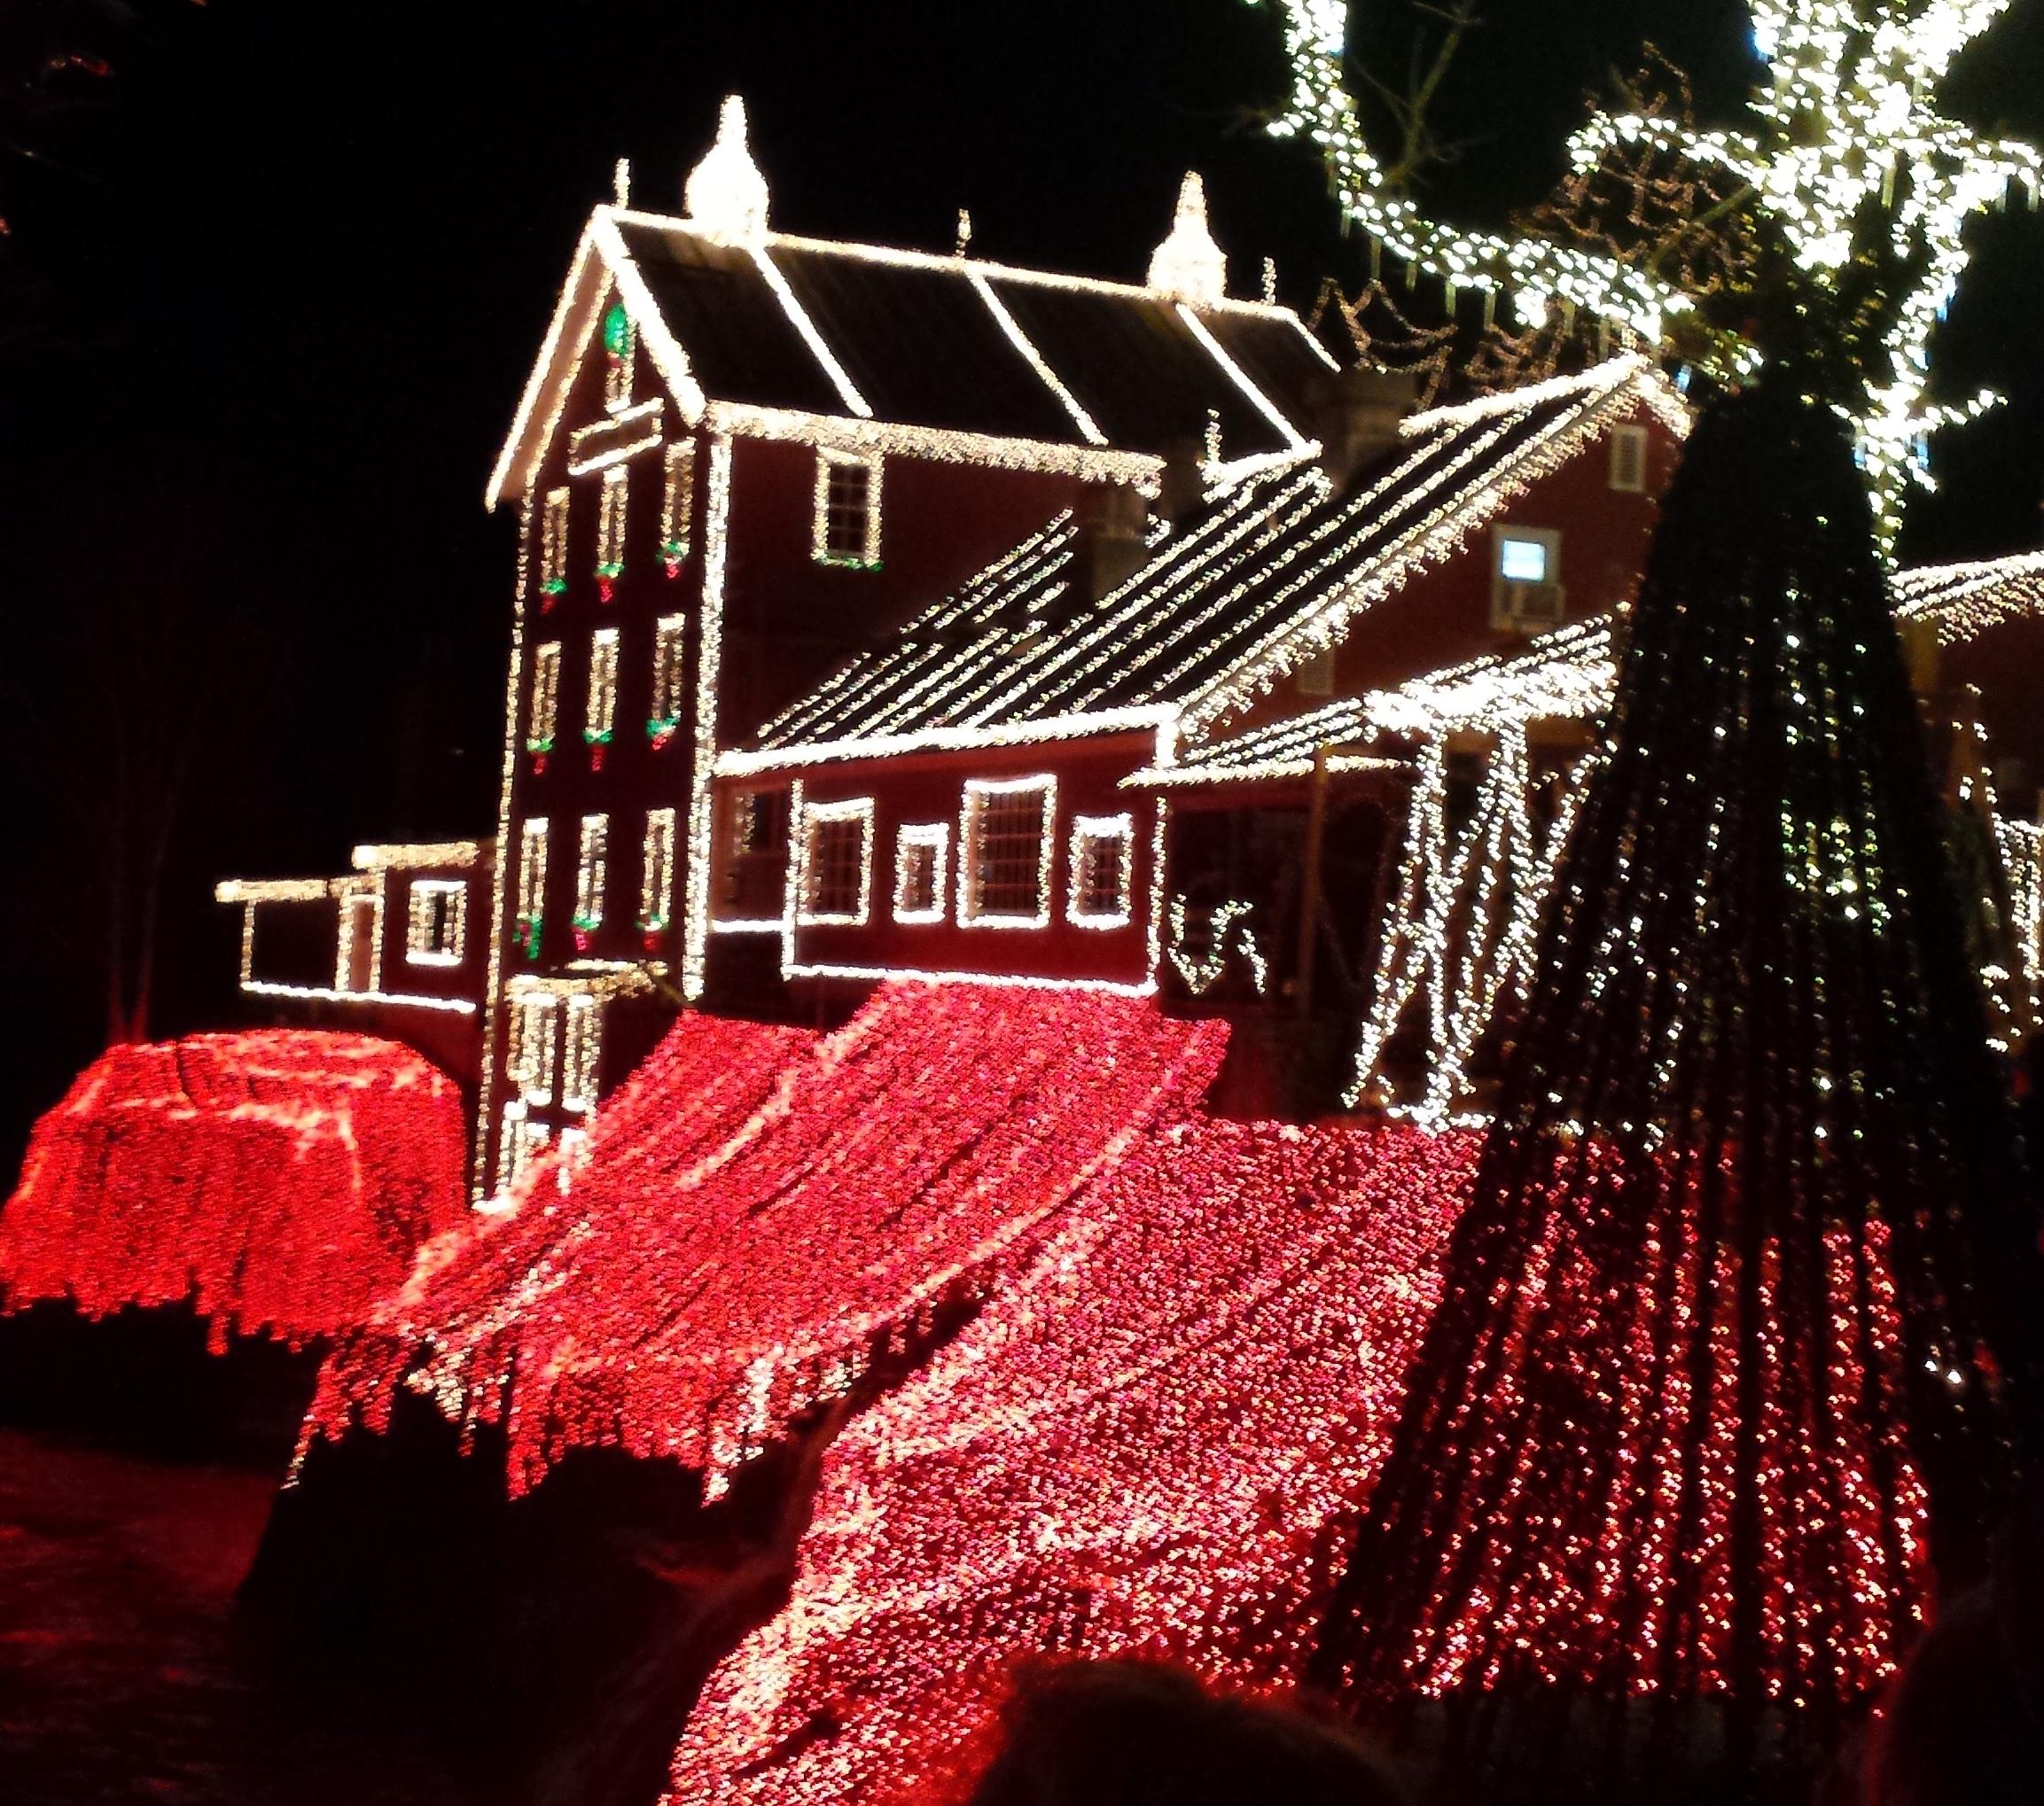 Clifton Mill Holiday Light Display Going Strong After Three Decades WVXU